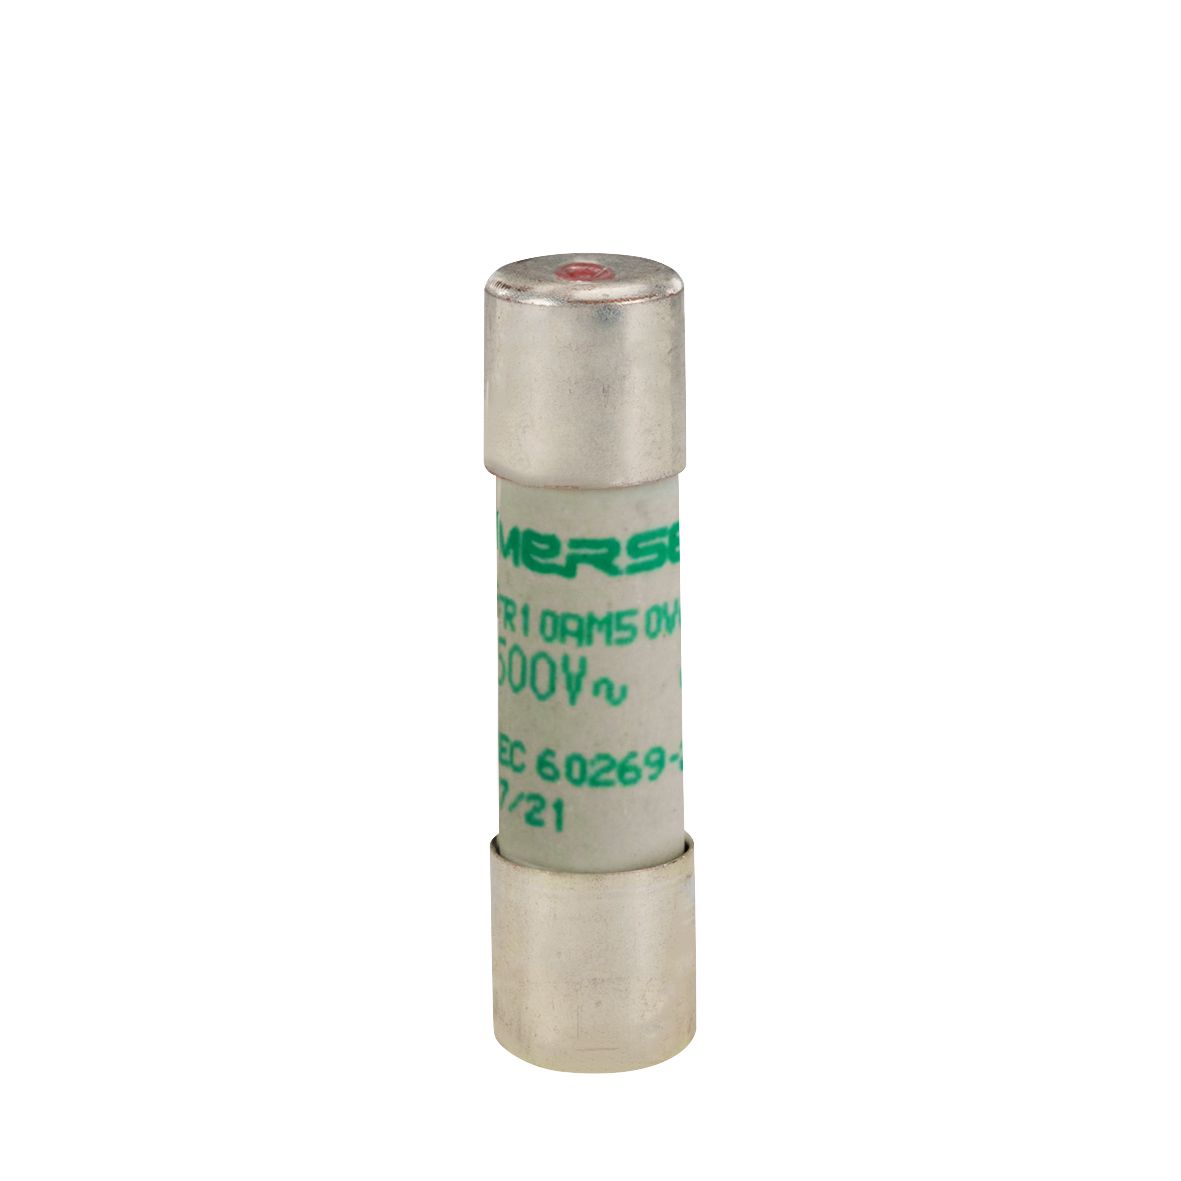 K200753 - Cylindrical fuse-link aM 500VAC 10.3x38, 4A with indicator